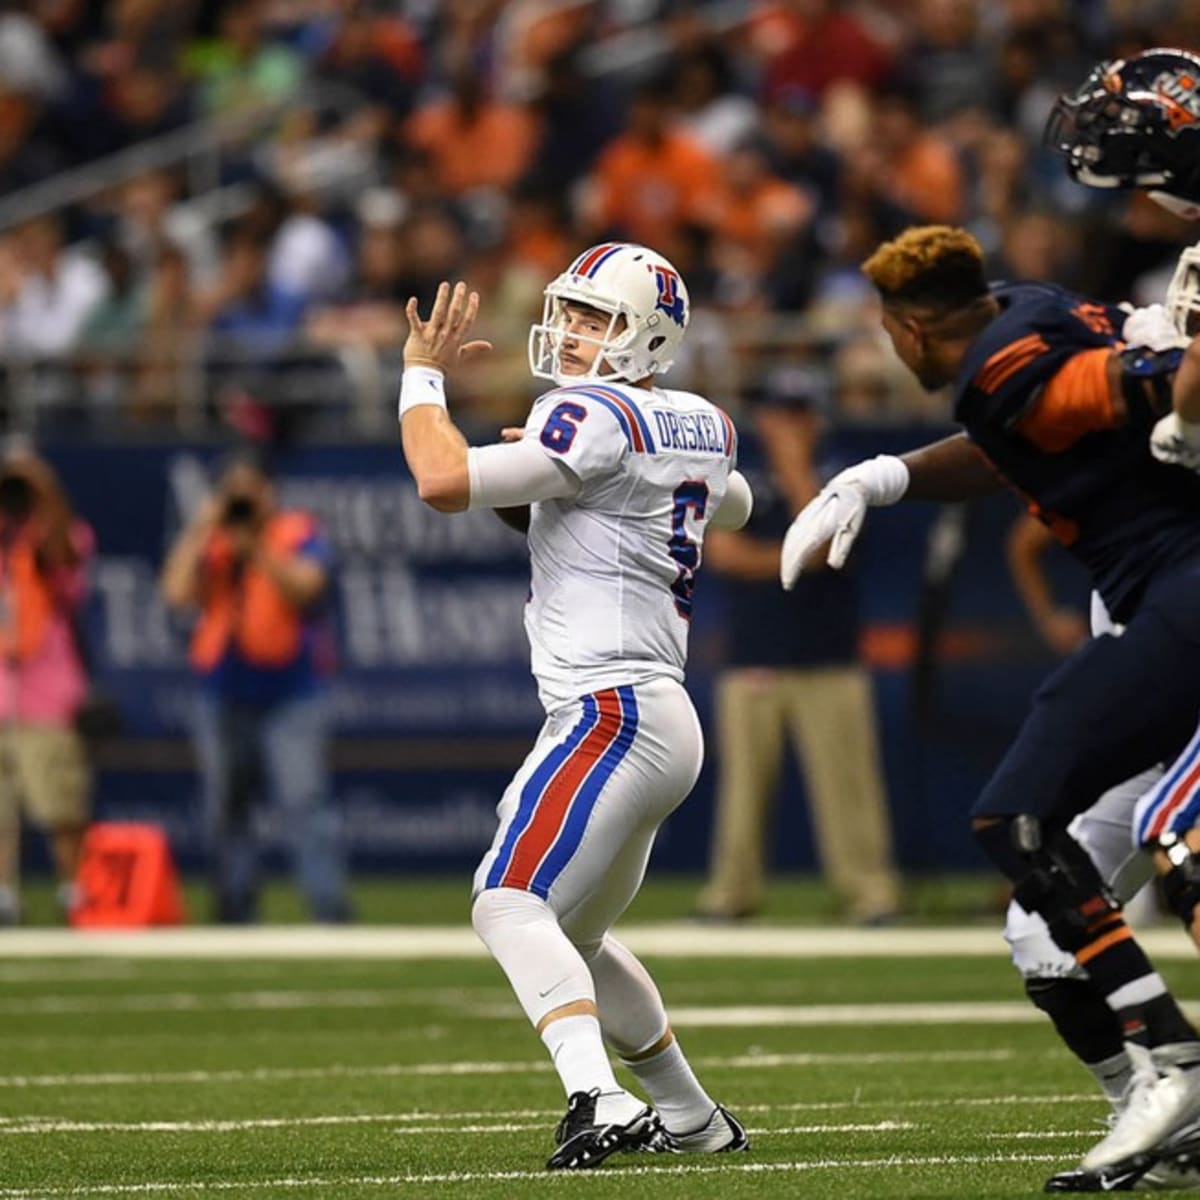 Jeff Driskel's second act: How the former Florida QB rejuvenated his career  - Sports Illustrated